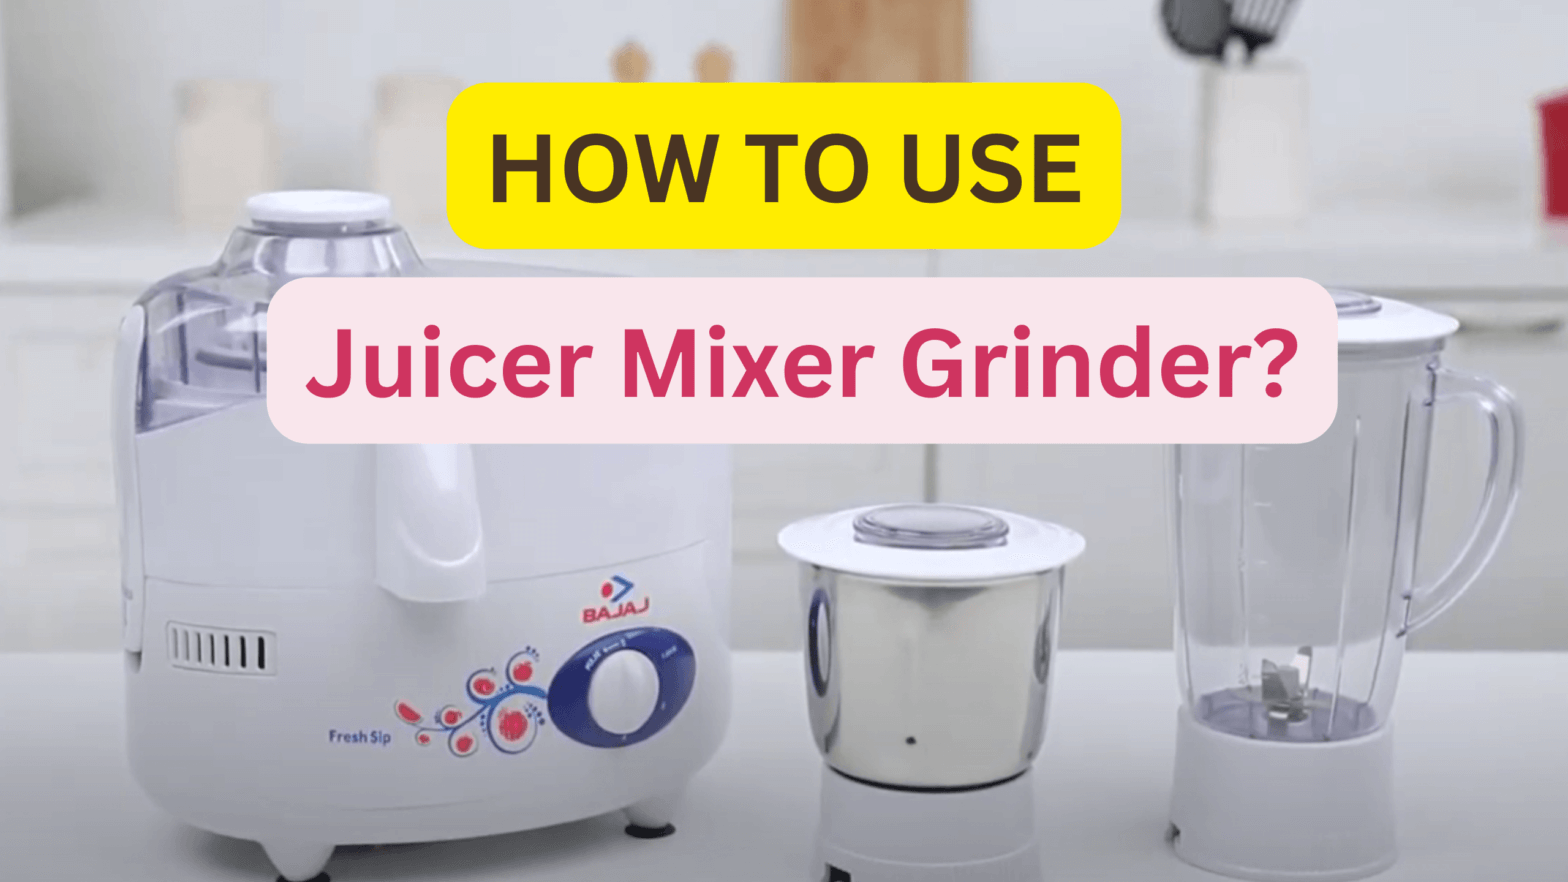 How To Use Juicer Mixer Grinder